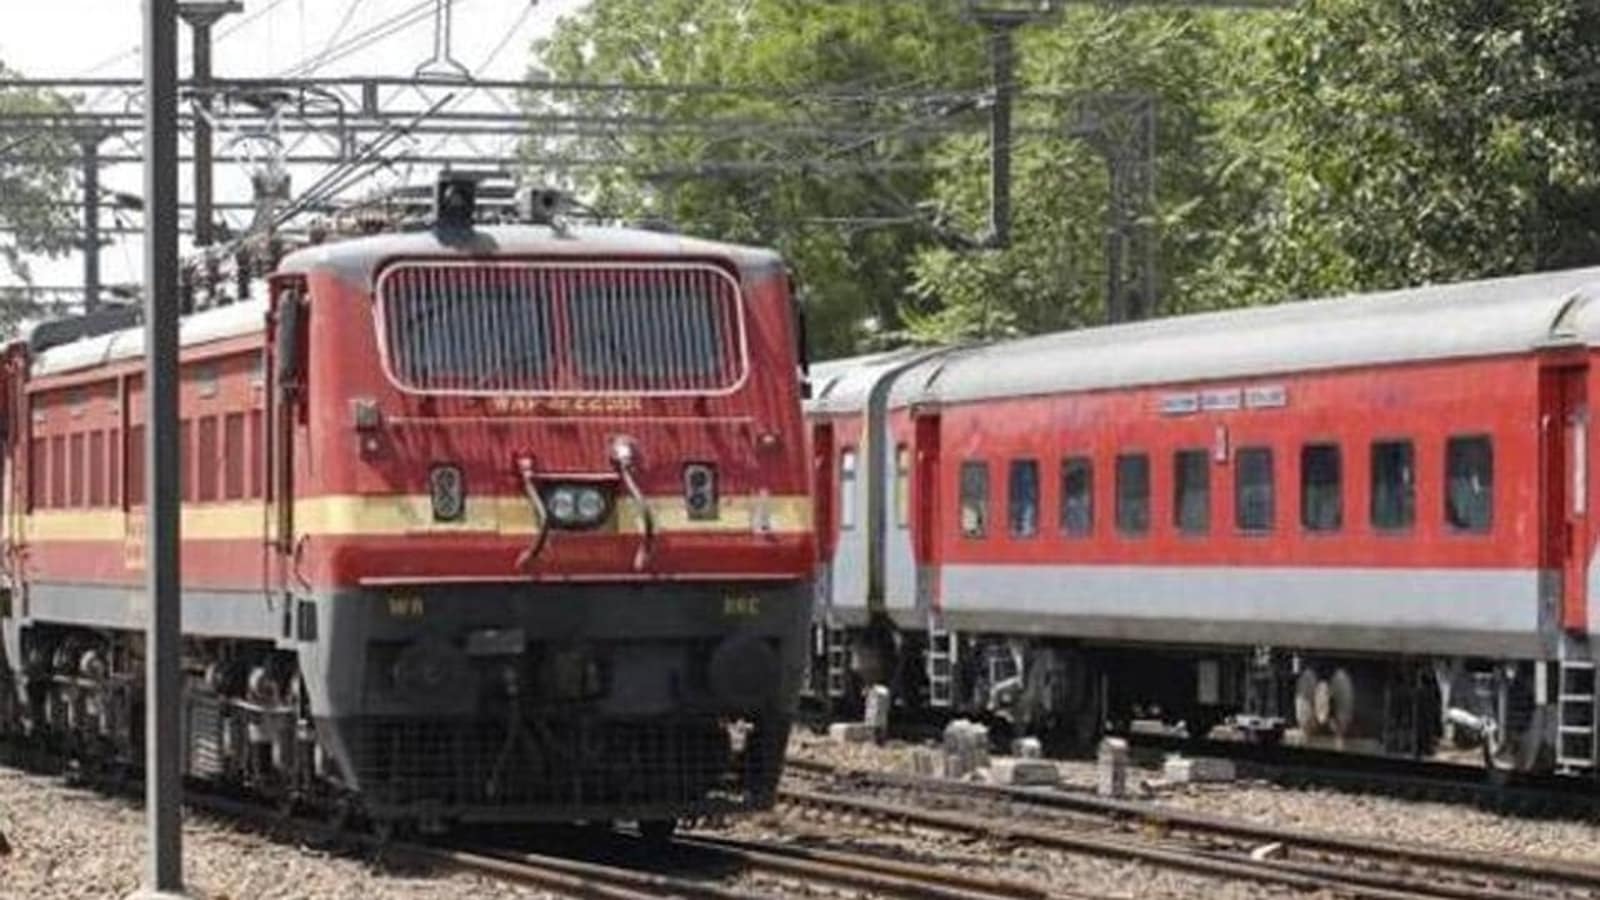 RRB CBT Phase II: Link for viewing exam city to be out soon, check scheduled